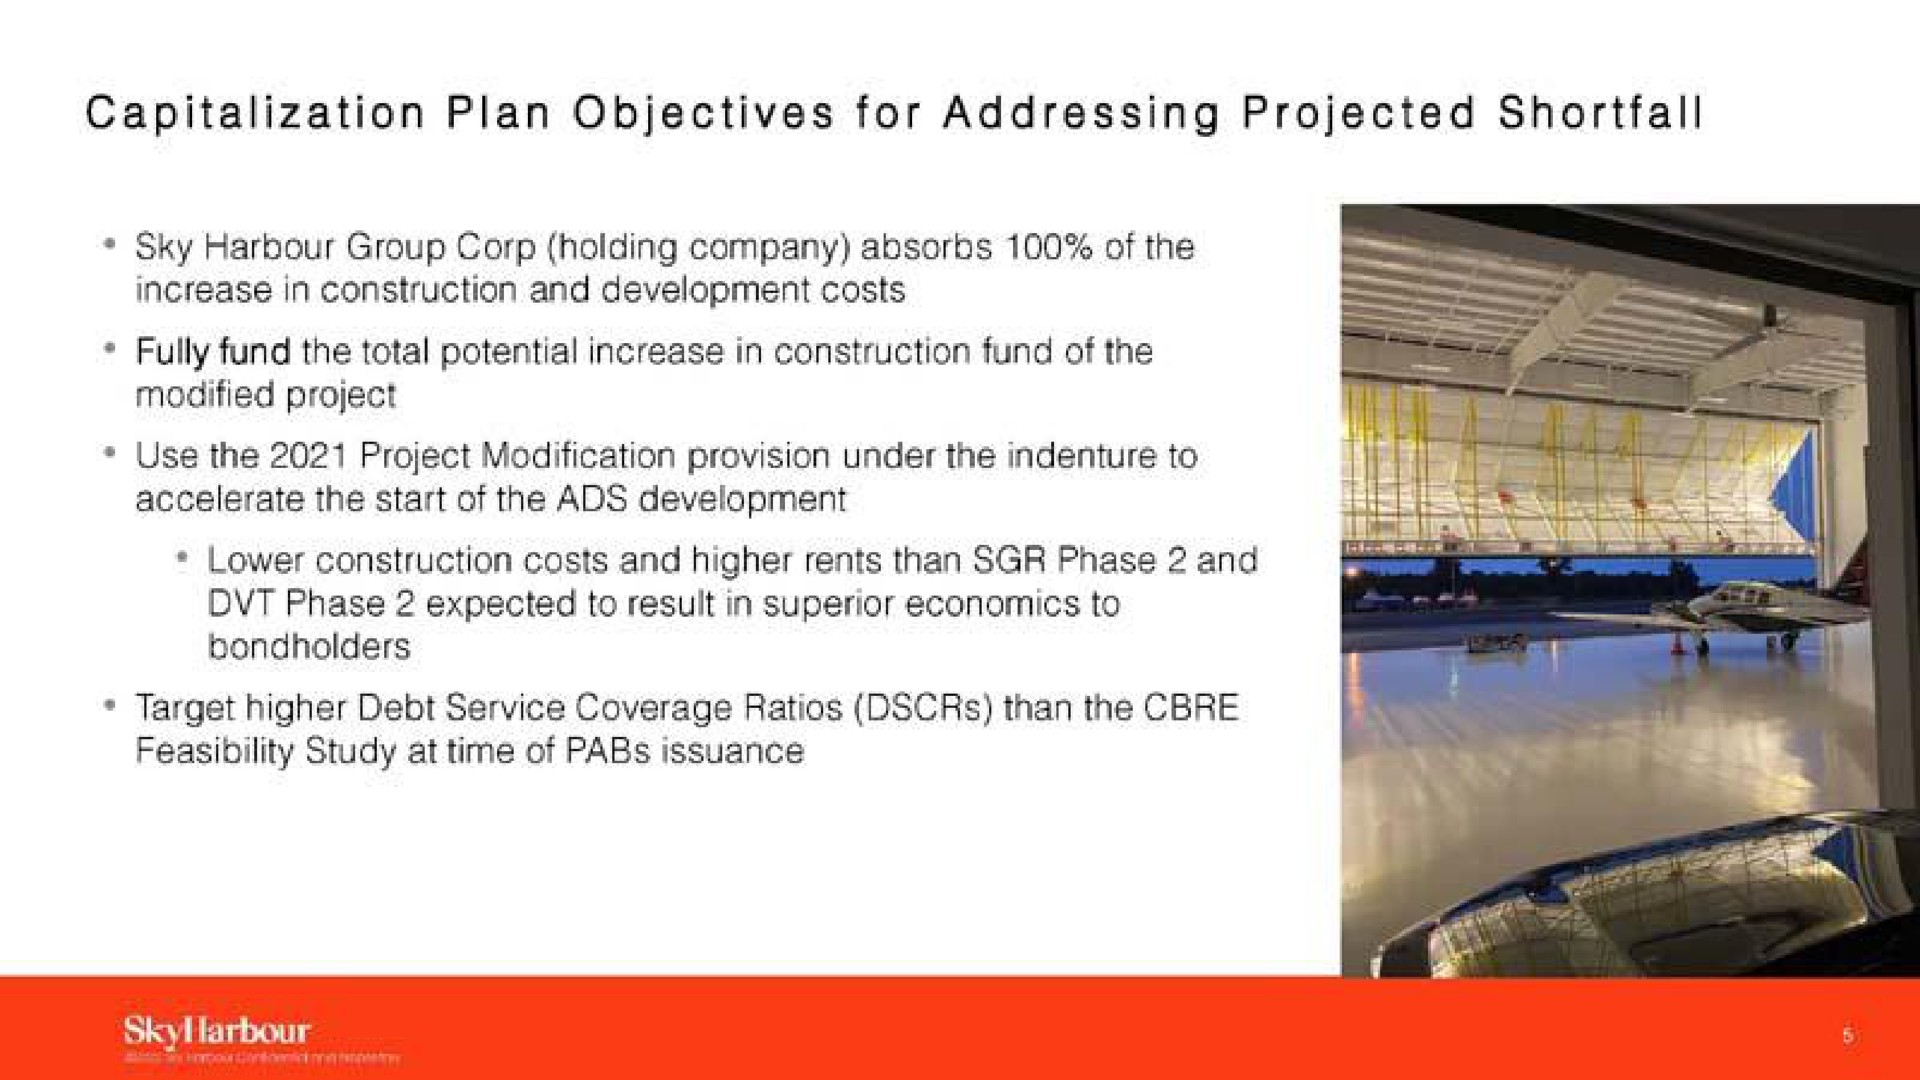 capitalization plan objectives for addressing projected shortfall sky harbour group corp holding company absorbs of the increase in construction and development costs fully fund the total potential increase in construction fund of the modified project use the project modification provision under the indenture to accelerate the start of the ads development lower construction costs and higher rents than phase and phase expected to result in superior economics to target higher debt service coverage ratios than the feasibility study at time of issuance | SkyHarbour